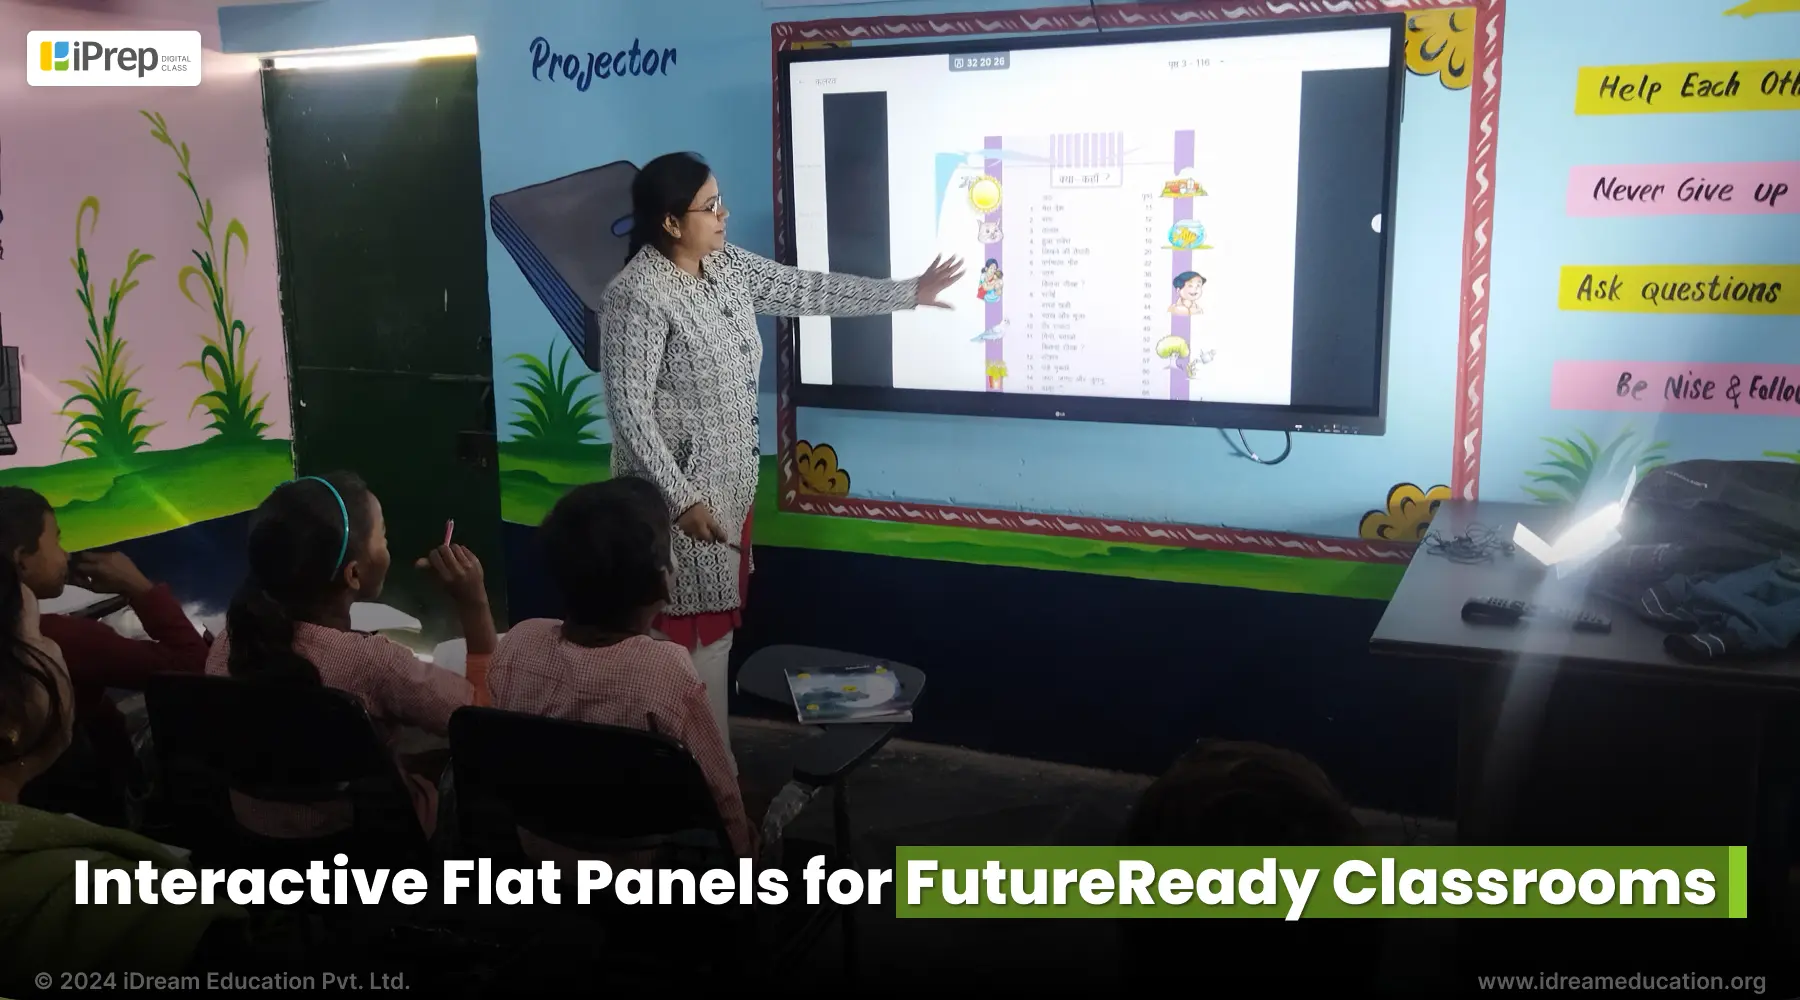 A visual representation of how interactive flat panels can make your classroom future-ready